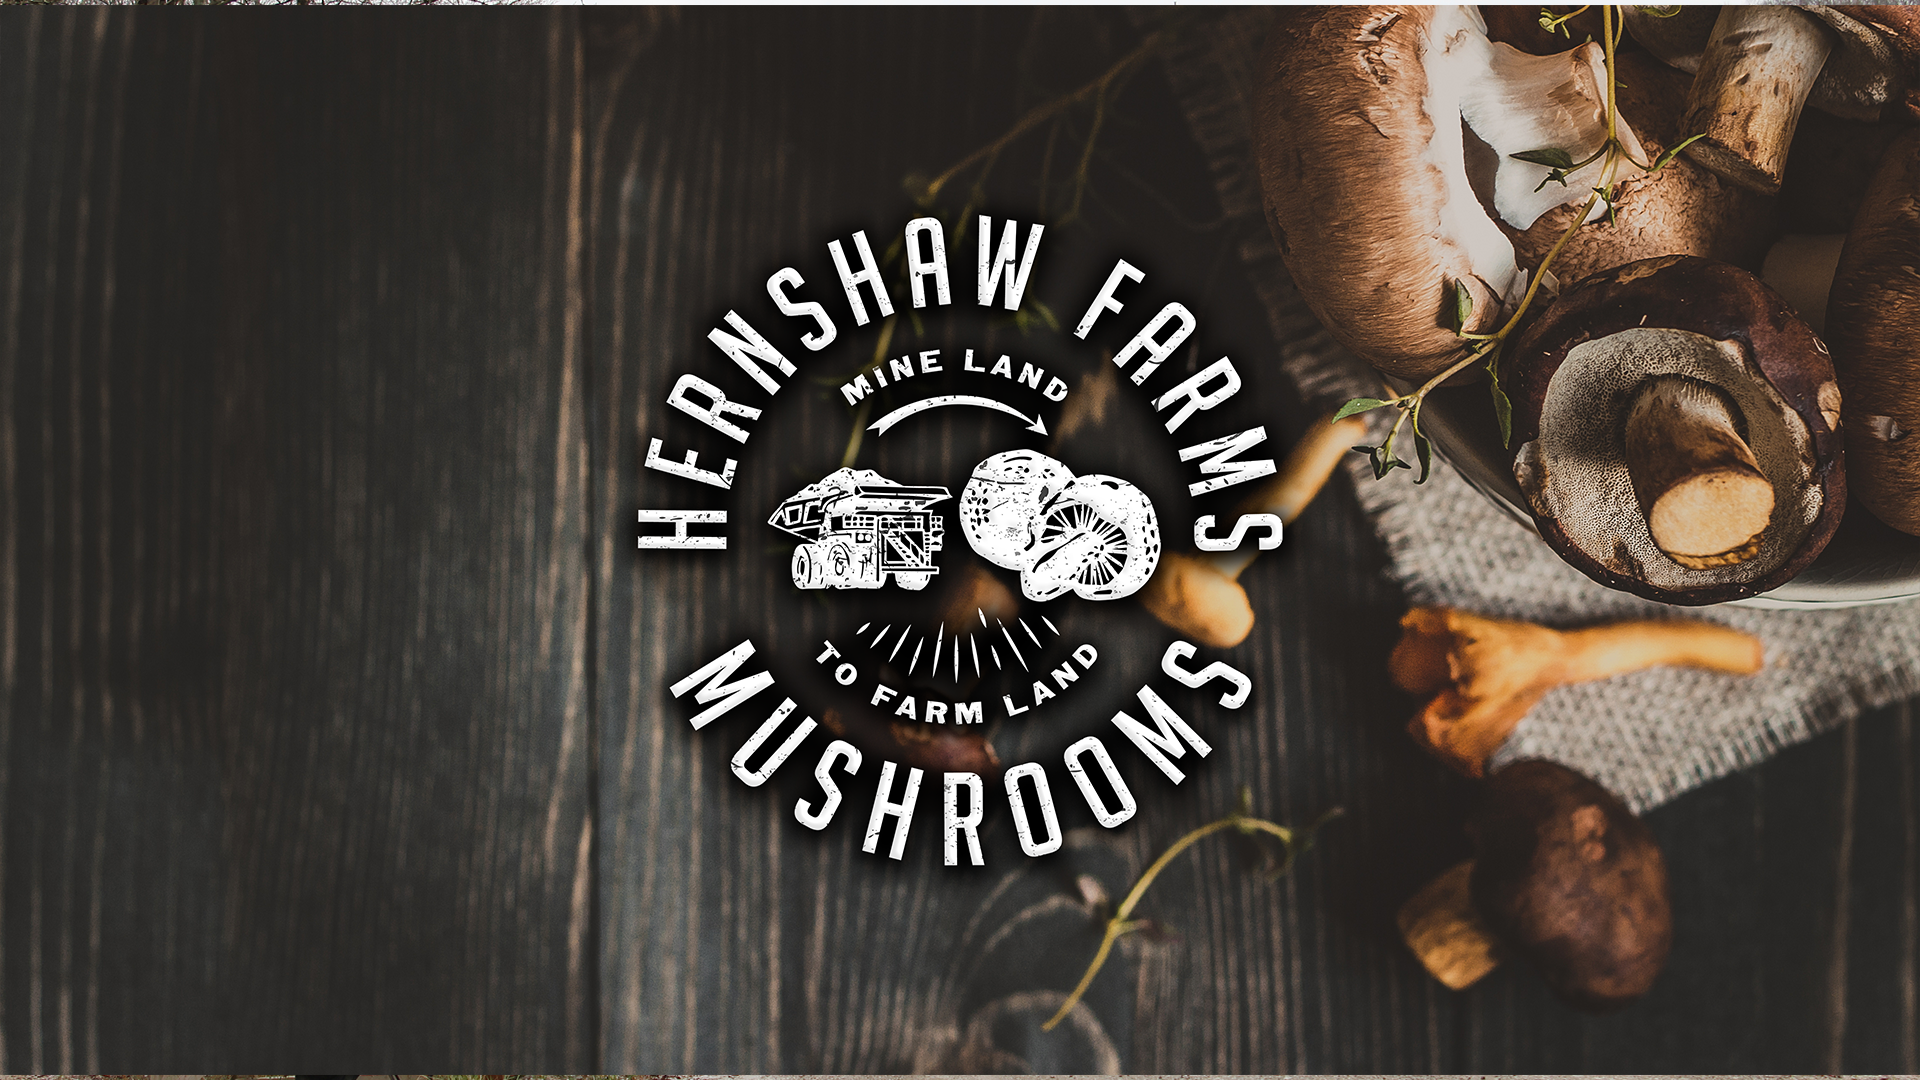 The finest mushrooms and mushroom grow kits are cultivated at Hernshaw Farms in West Virginia.